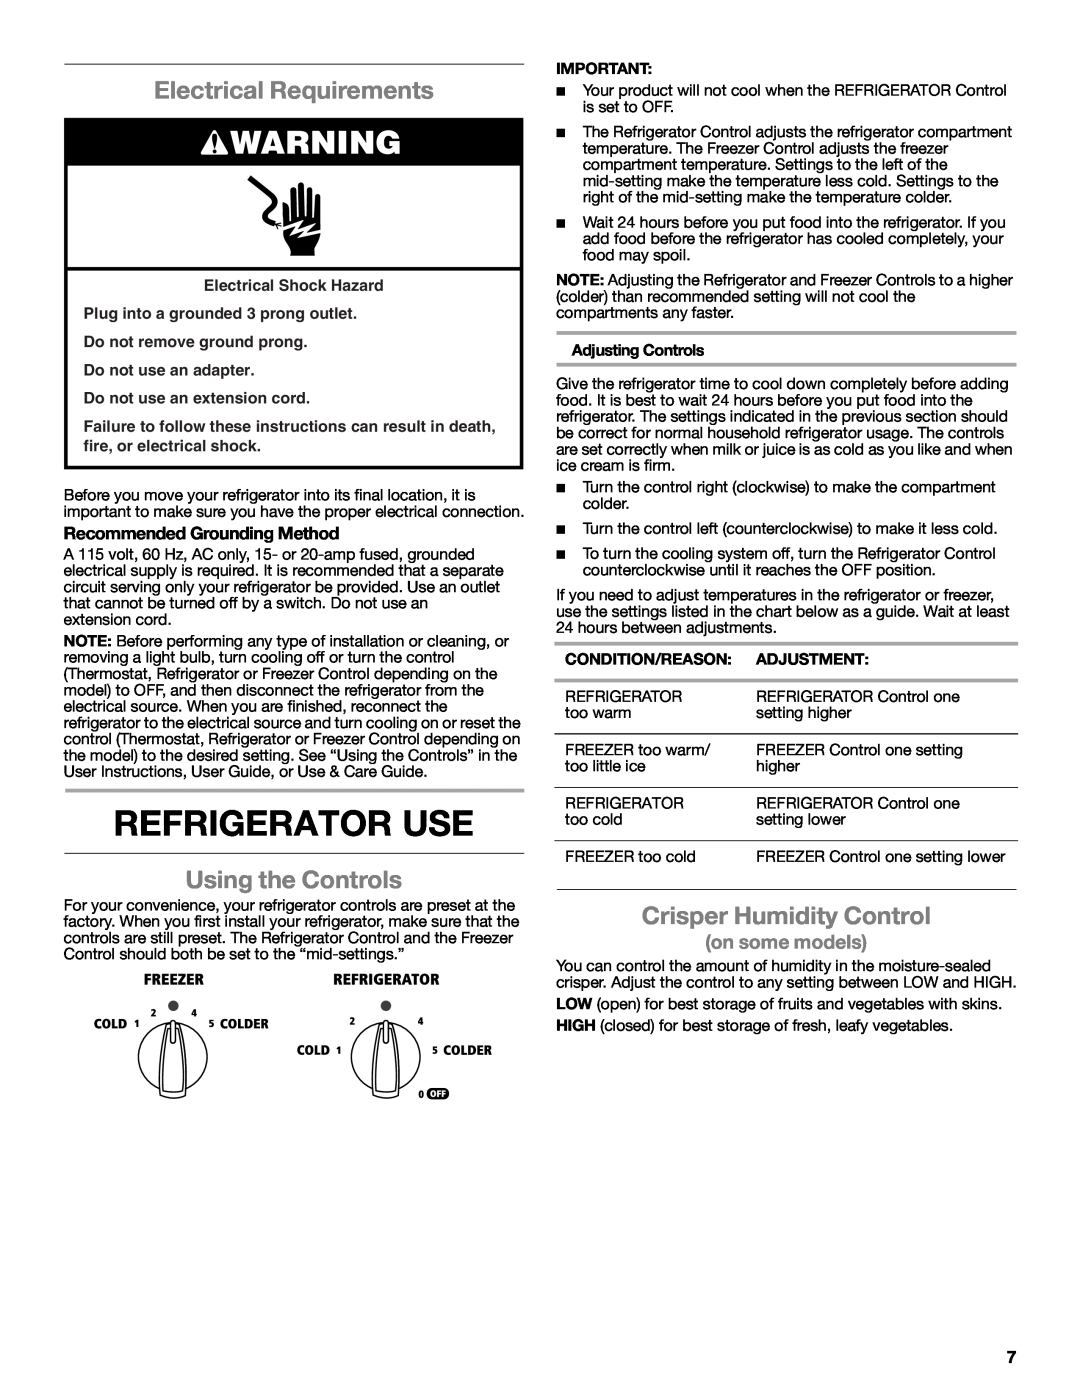 Whirlpool WRS325FNAM Refrigerator Use, Electrical Requirements, Using the Controls, Crisper Humidity Control, Adjustment 